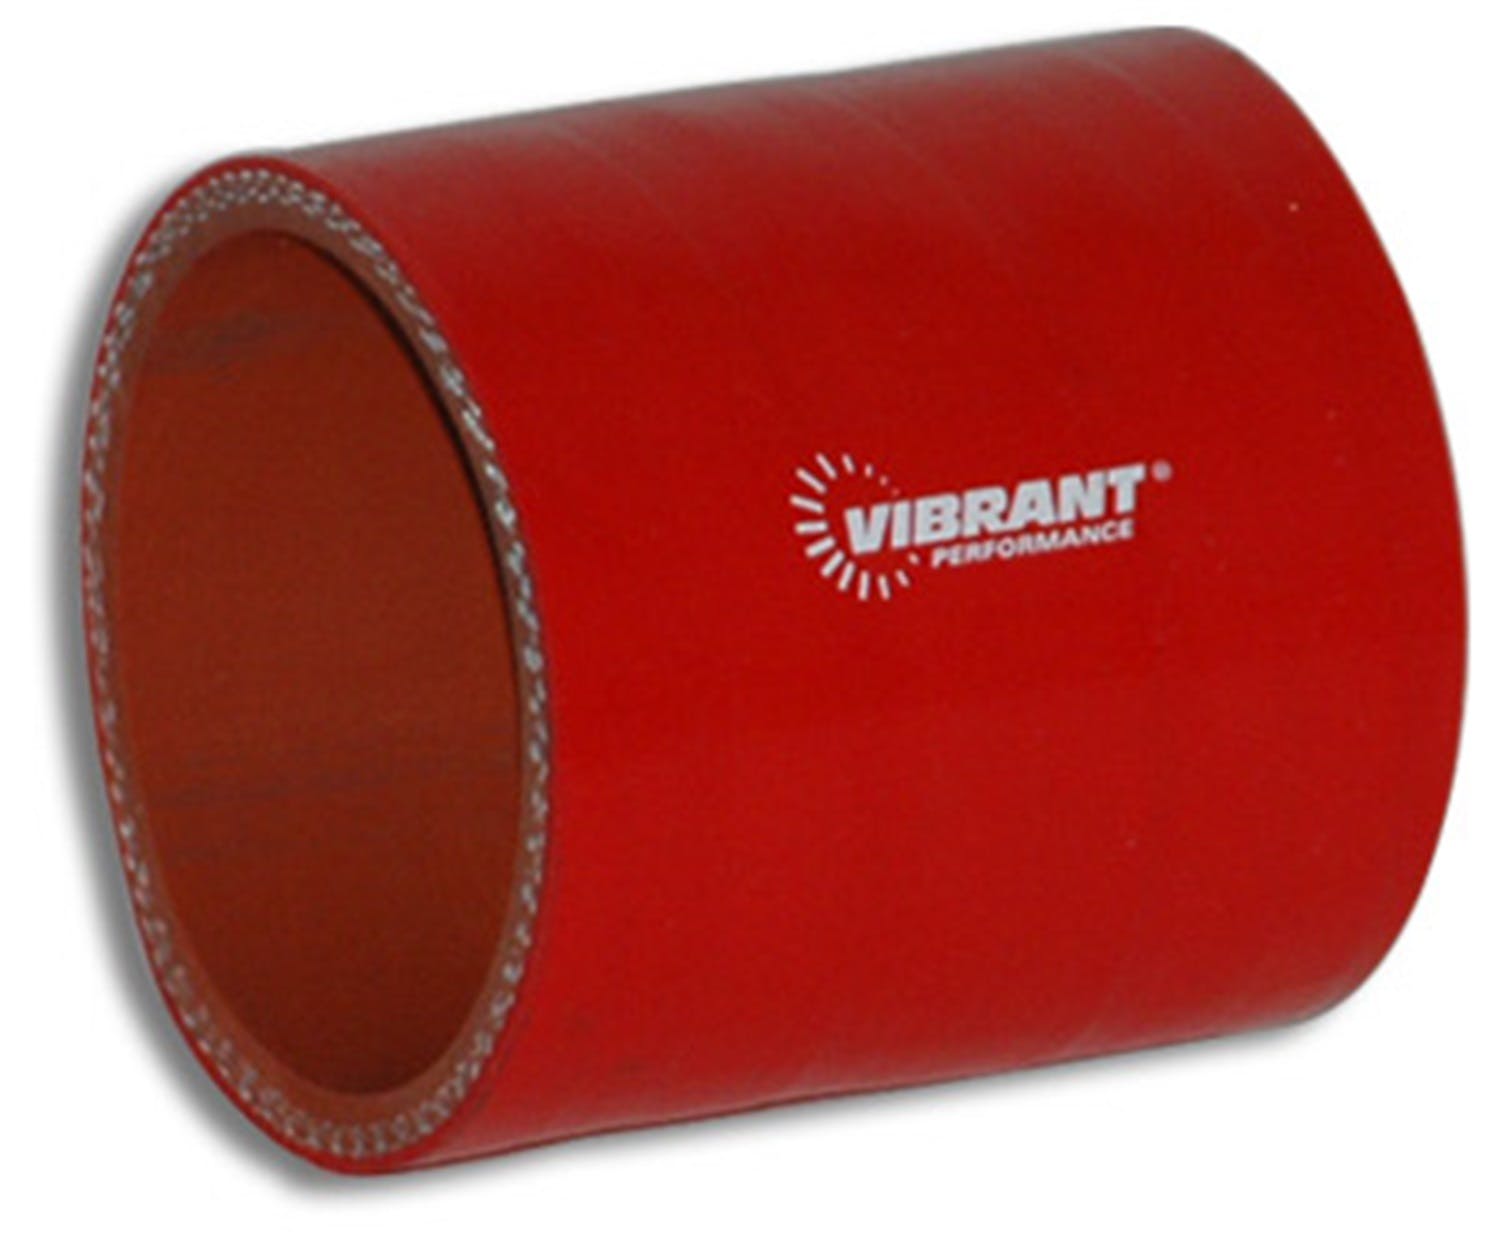 Vibrant Performance 2708R 4 Ply Silicone Sleeve, 2.25 inch I.D. x 3 inch Long - Red